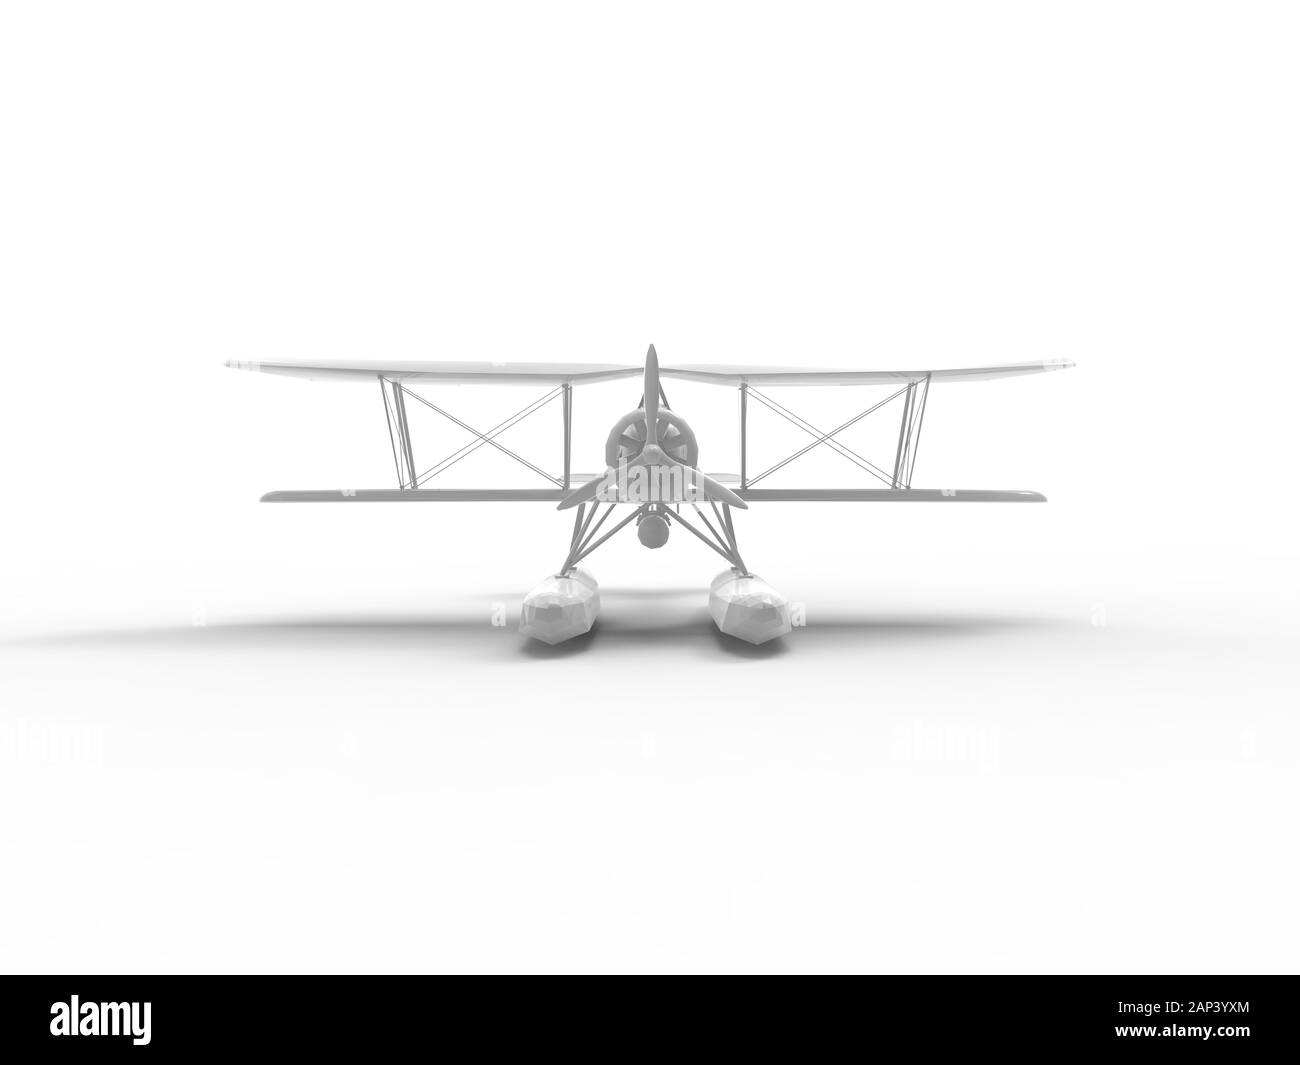 3D rendering of a water plane isolated in empty white space. Stock Photo